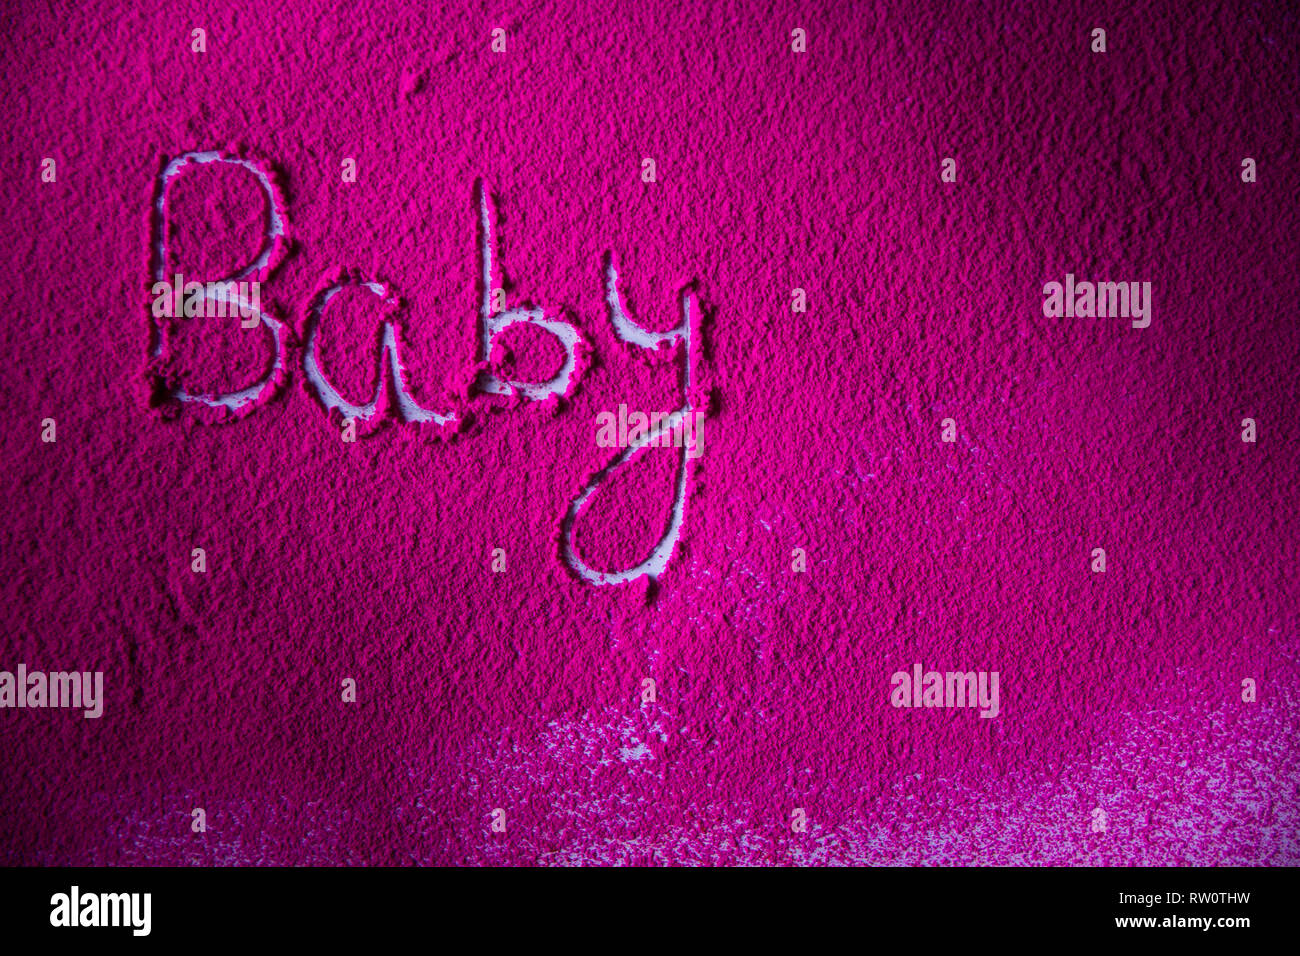 Colorful Powder written word Baby Stock Photo